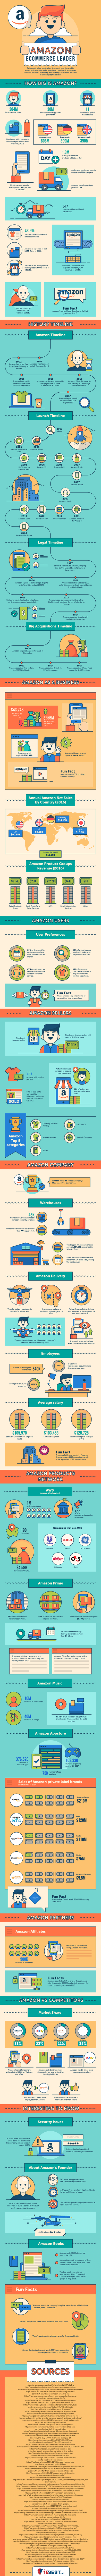 amazon-infographic know about its history and current position